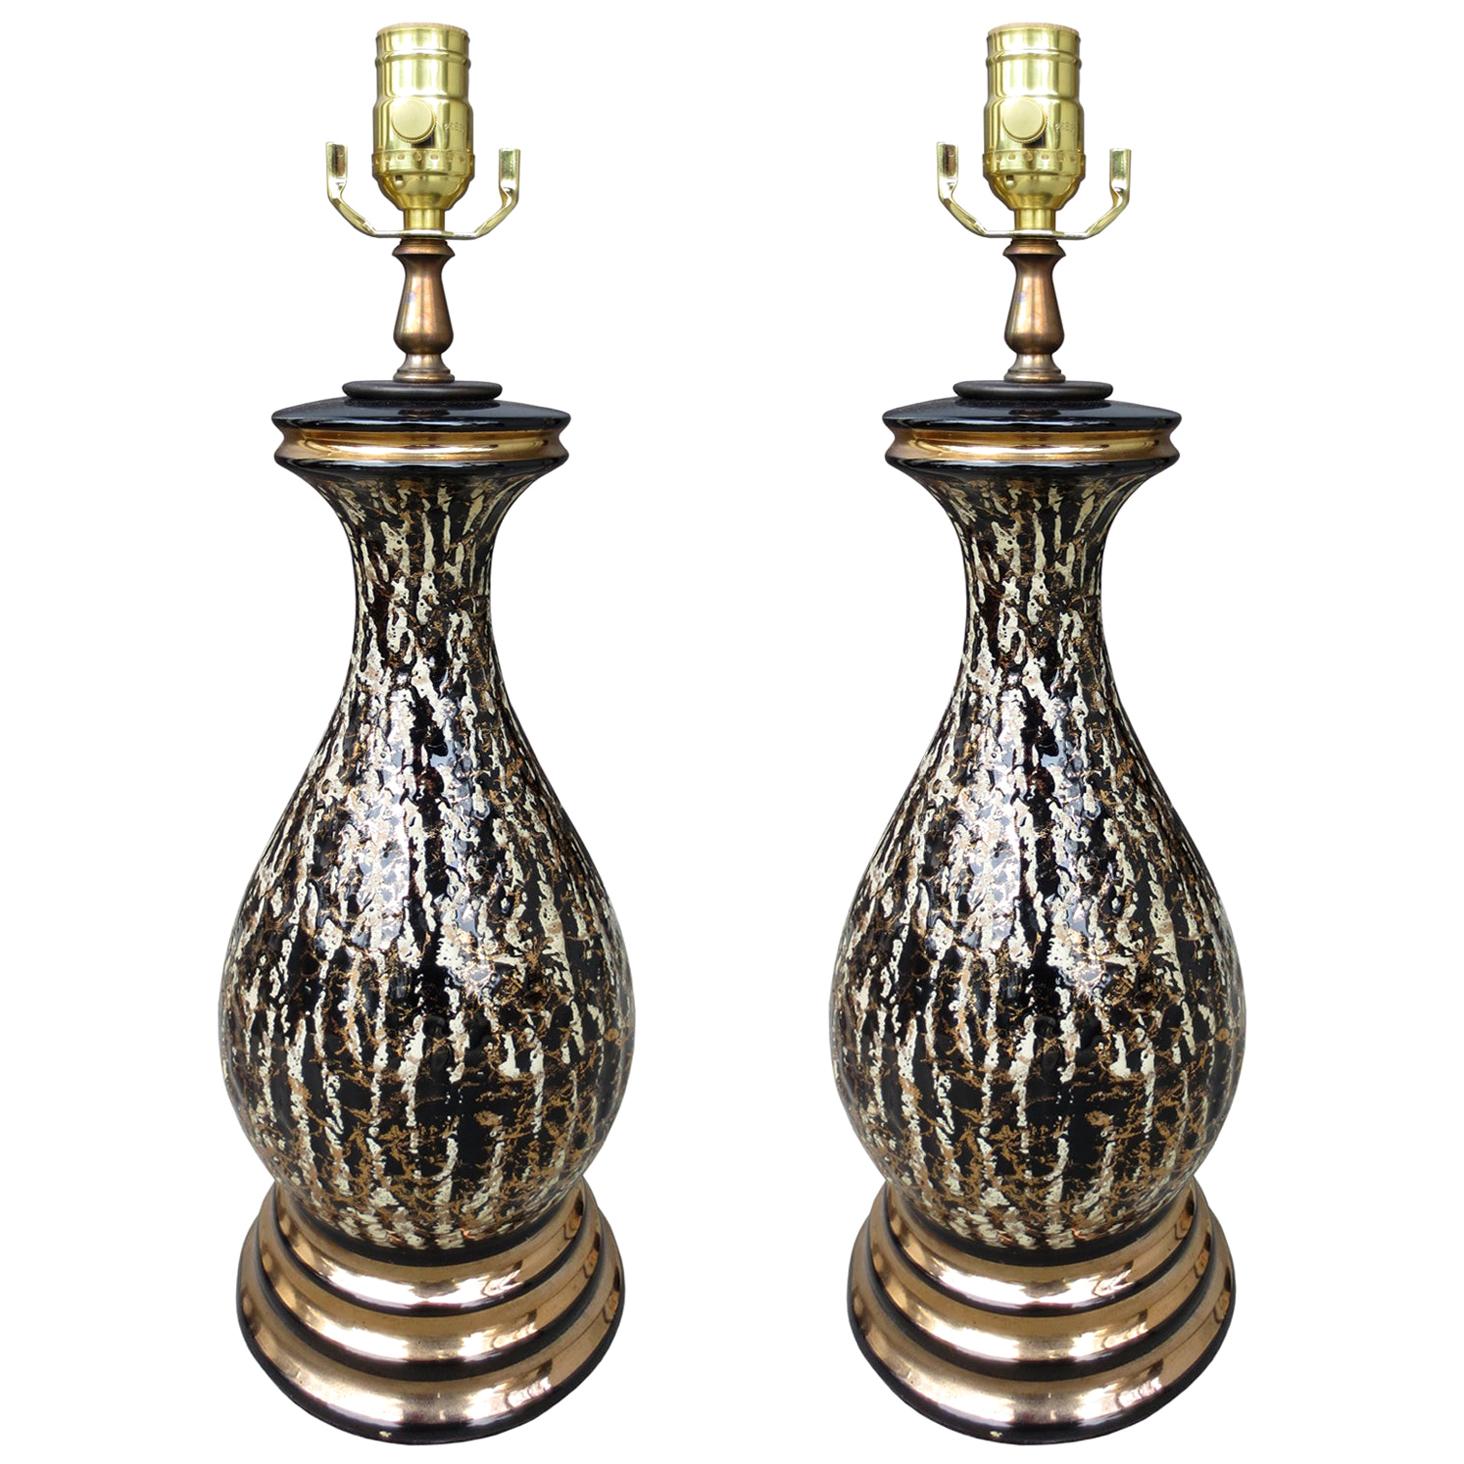 Pair of Mid-20th Century Black and Gold Glazed Pottery Lamps, circa 1950s-1960s For Sale